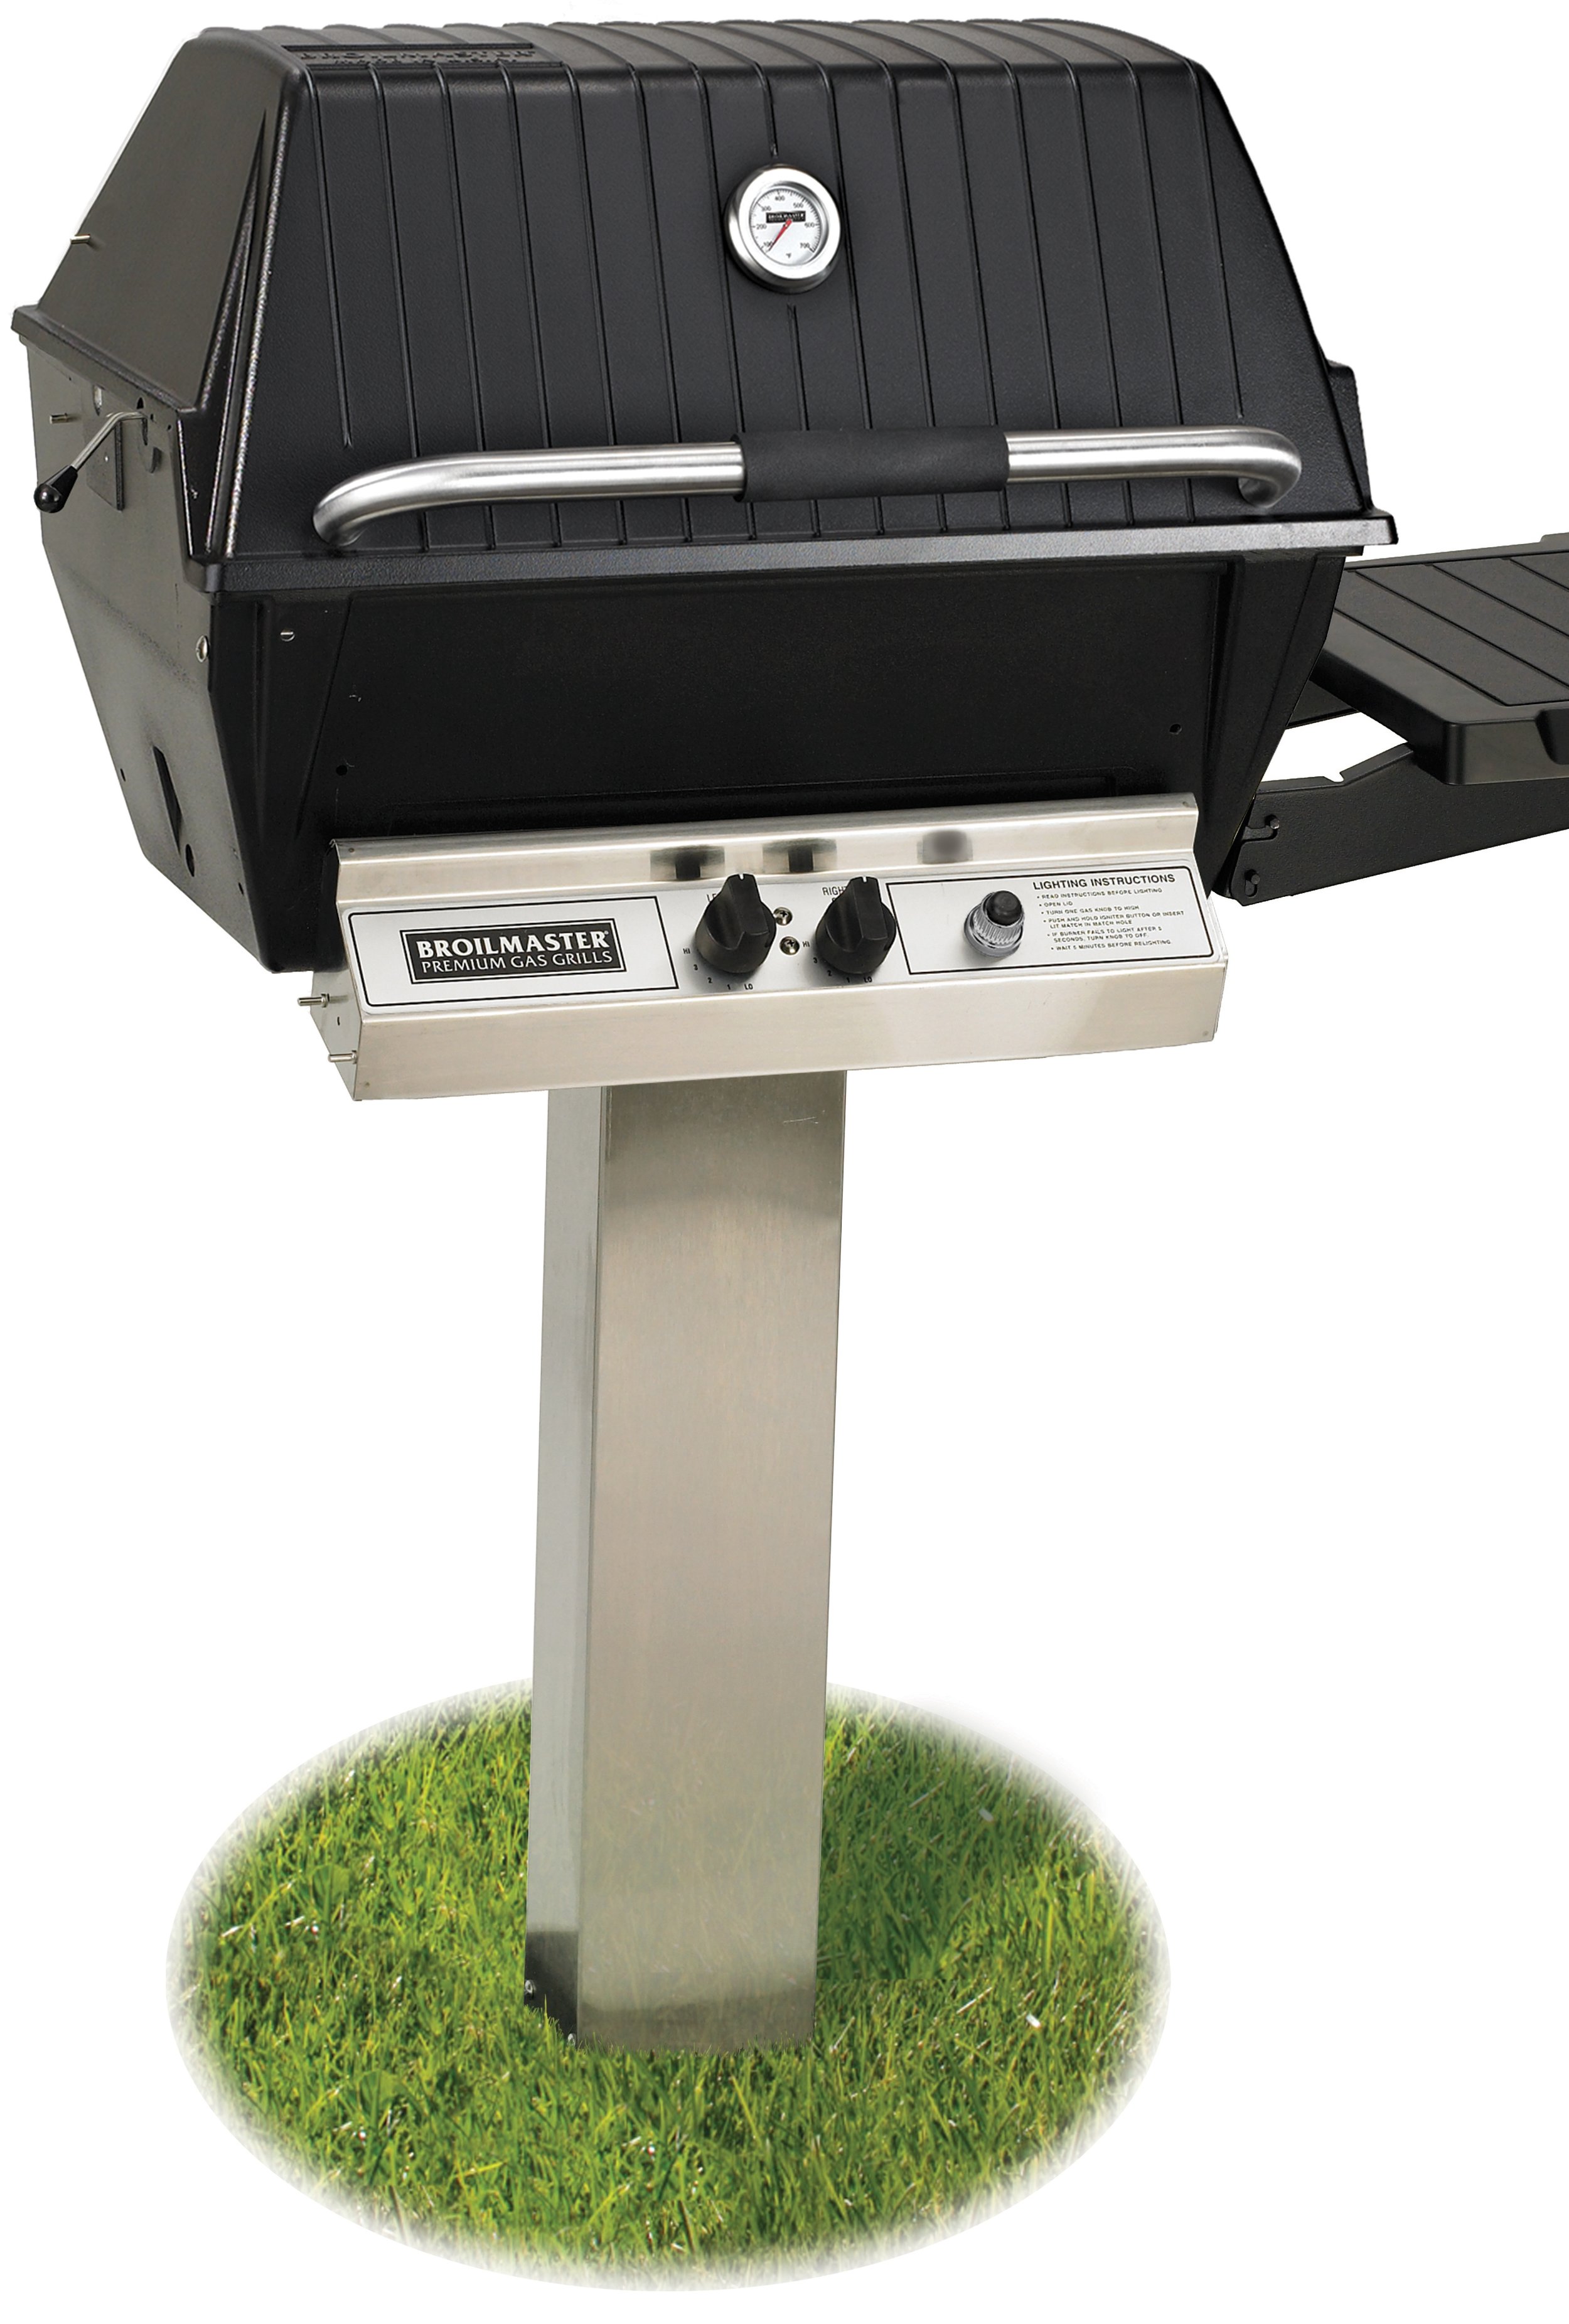 Gas Grills And Accessories Godby Hearth And Home Godby Hearth And Home